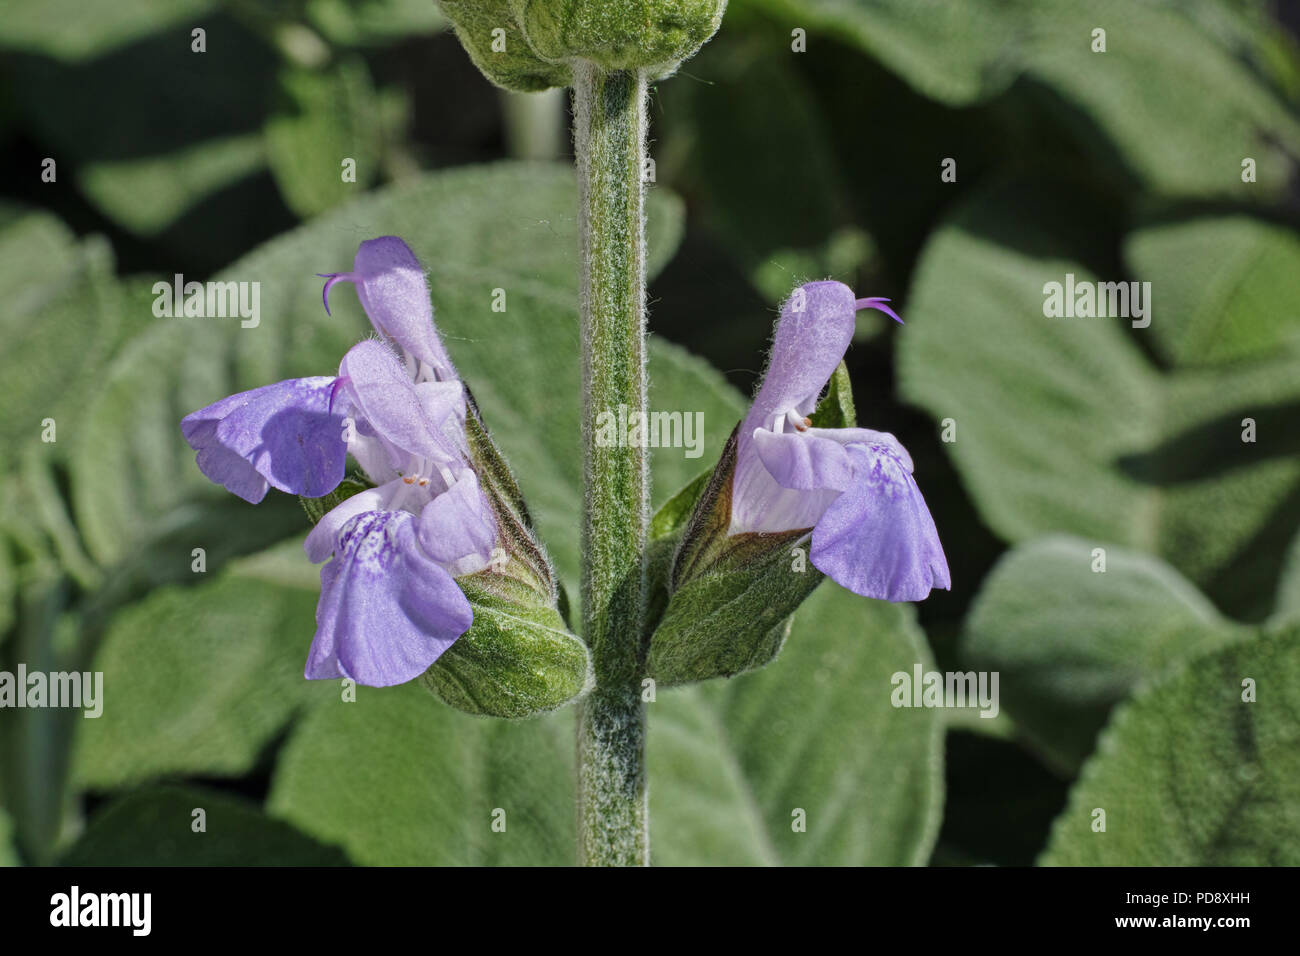 detail of the flowers of common sage, springtime Stock Photo